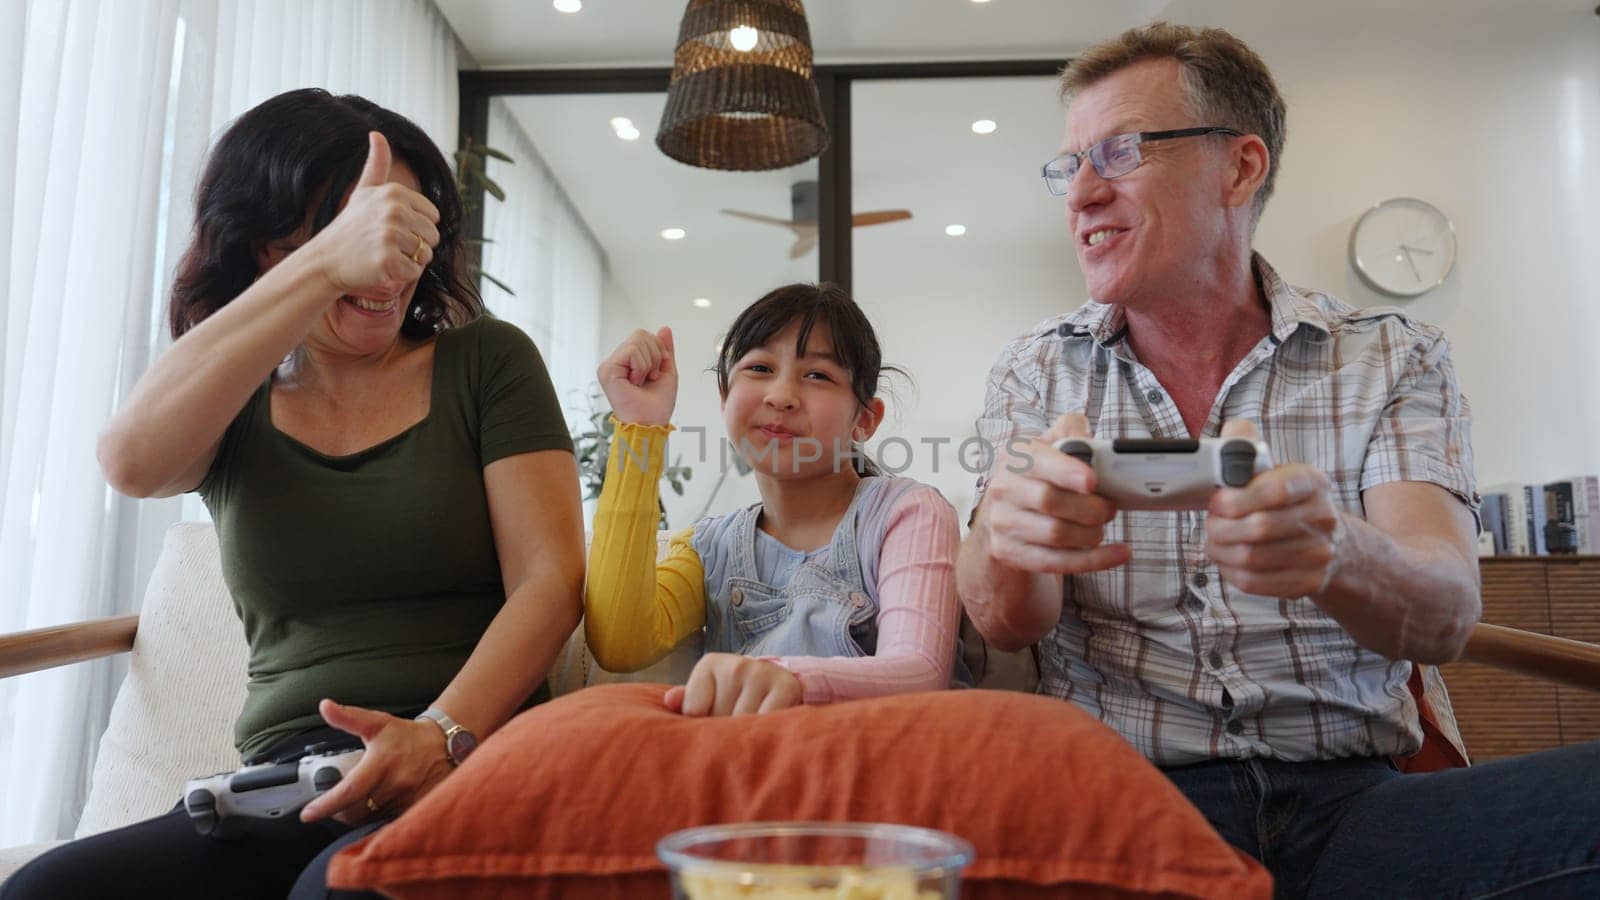 Grandfather, grandmother and granddaughter play console game as hobby. Old senior use technology activity communicate with new generation kid cross generation gap strengthen family bond. Divergence.